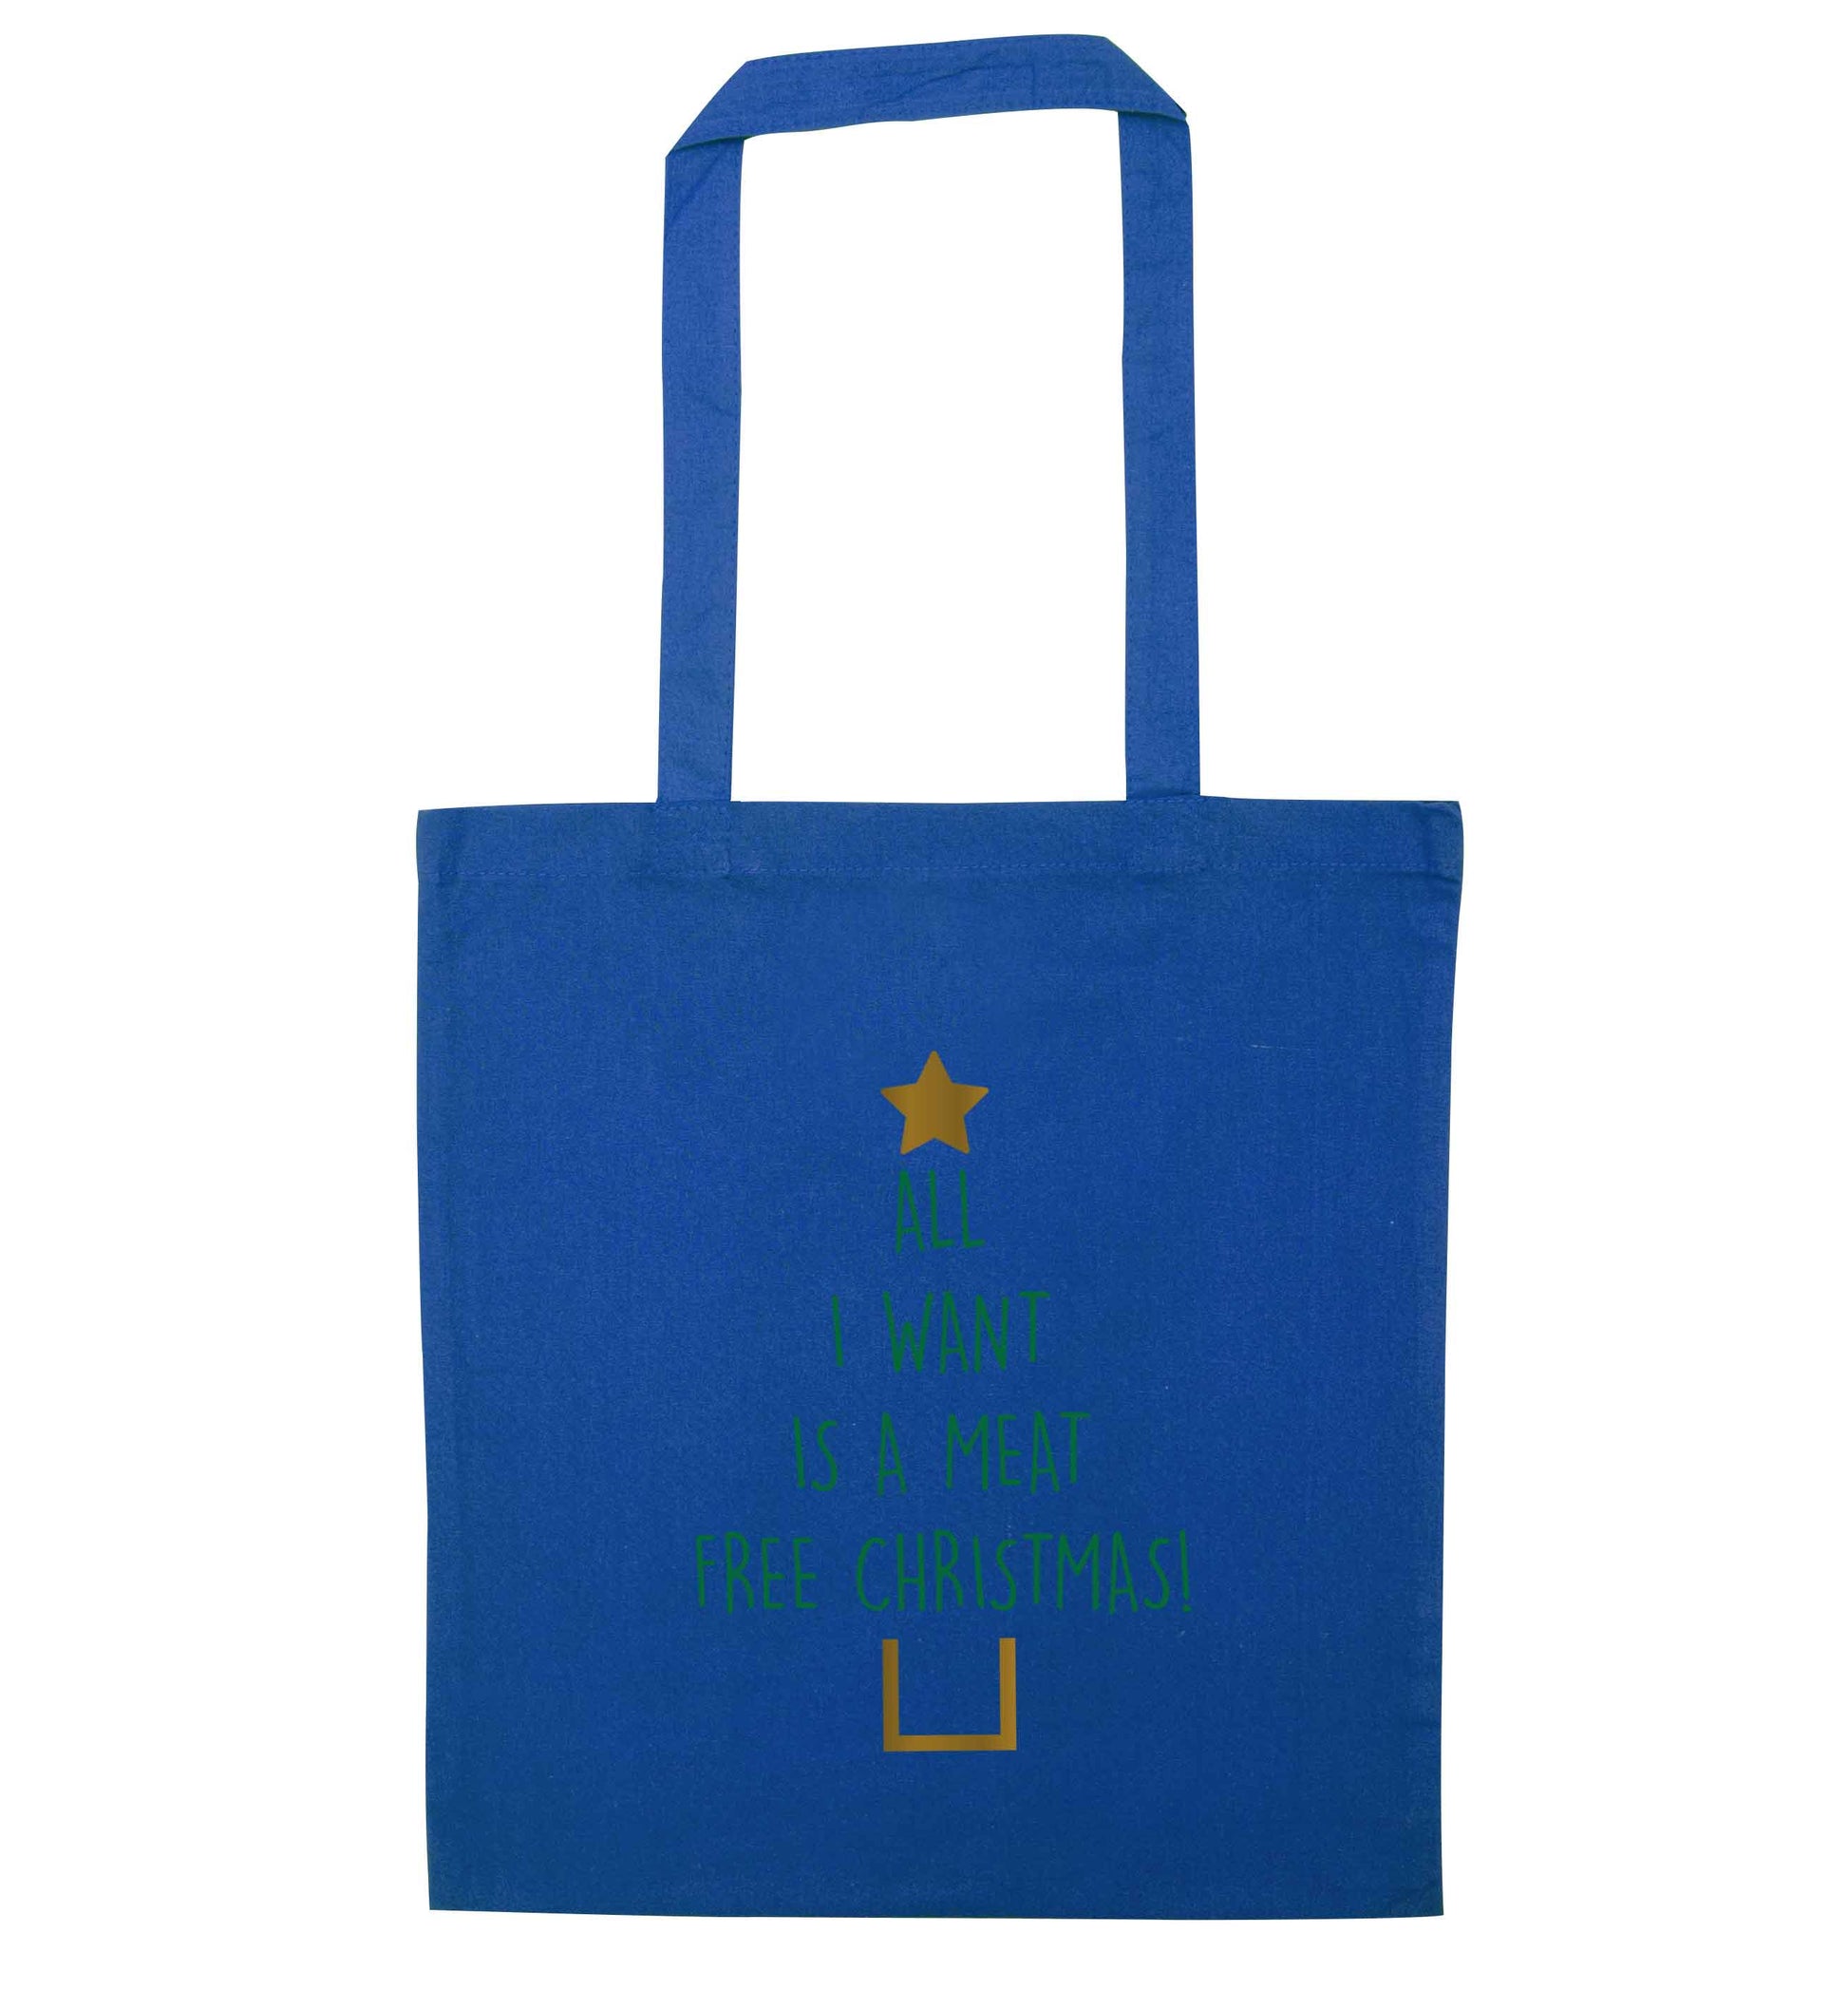 All I want is a meat free Christmas blue tote bag